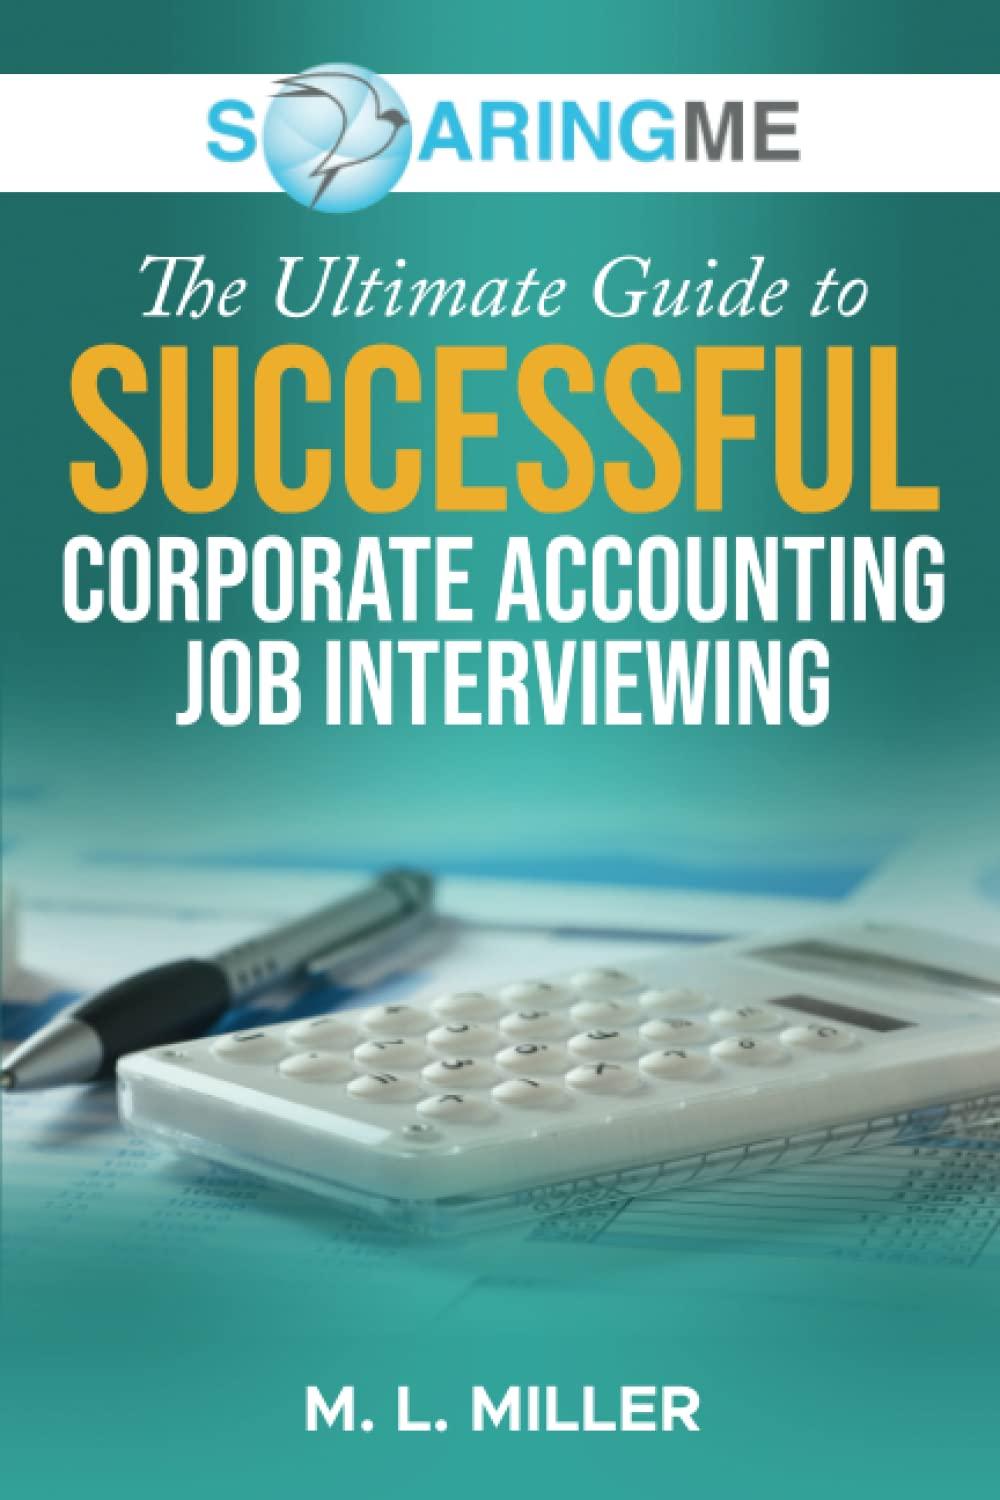 soaringme the ultimate guide to successful corporate accounting job interviewing 1st edition m. l. miller